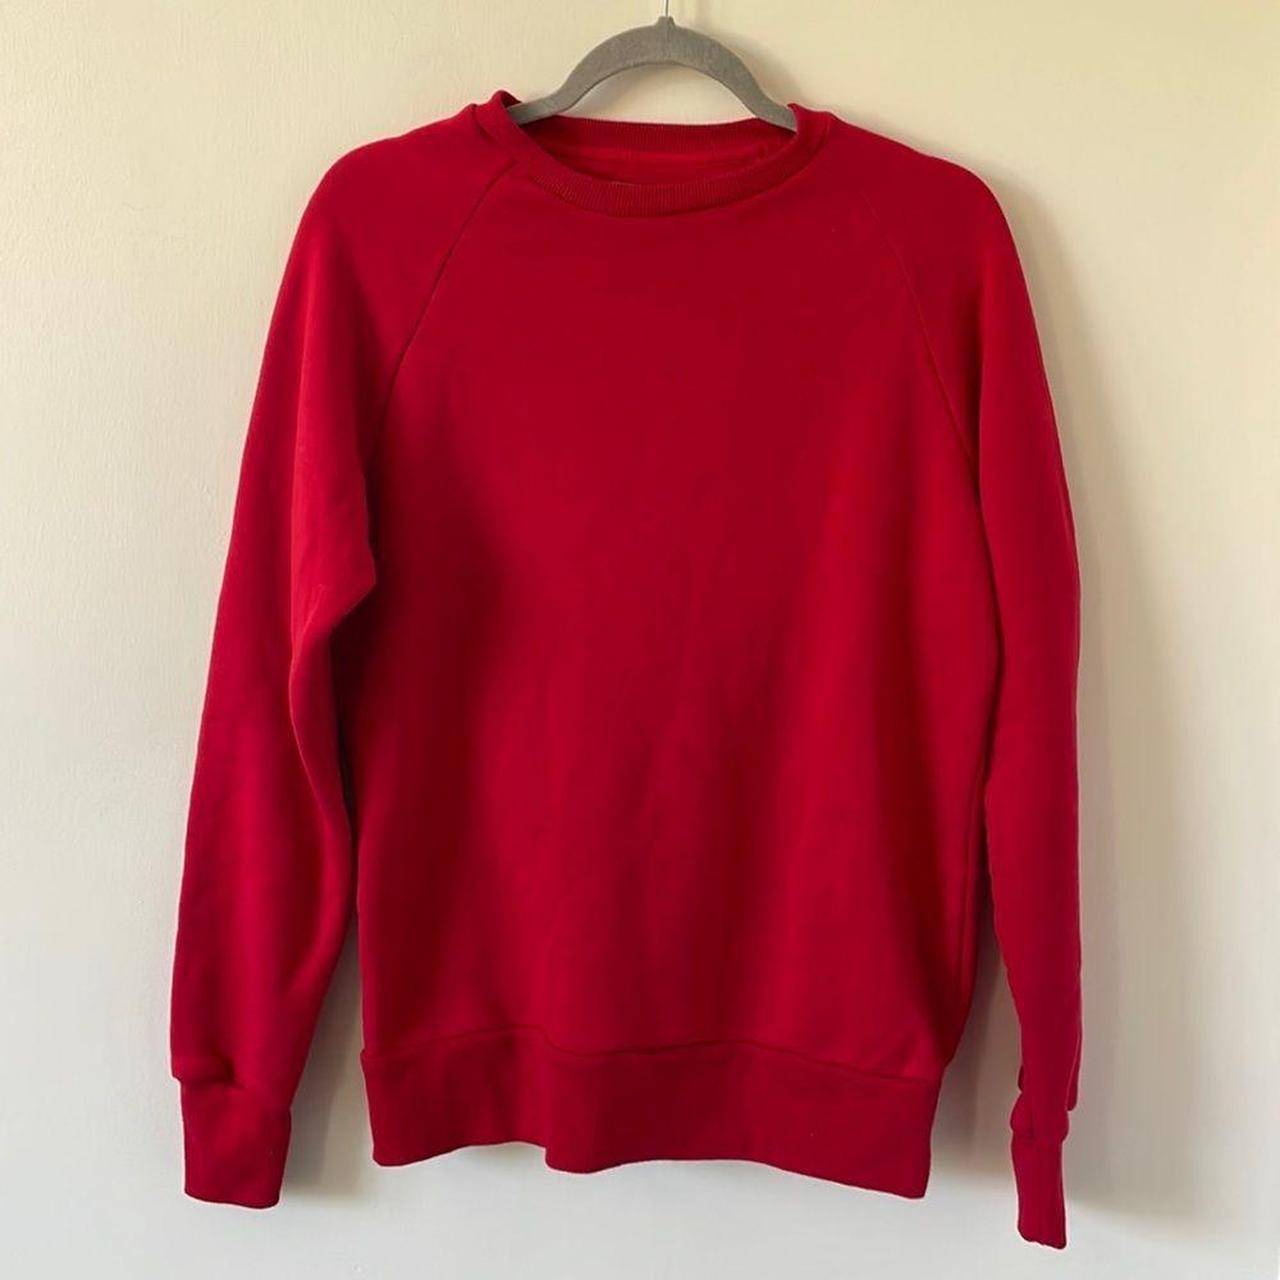 Product Image 2 - Brand: Primark
Size: Medium
Condition: Preowned with